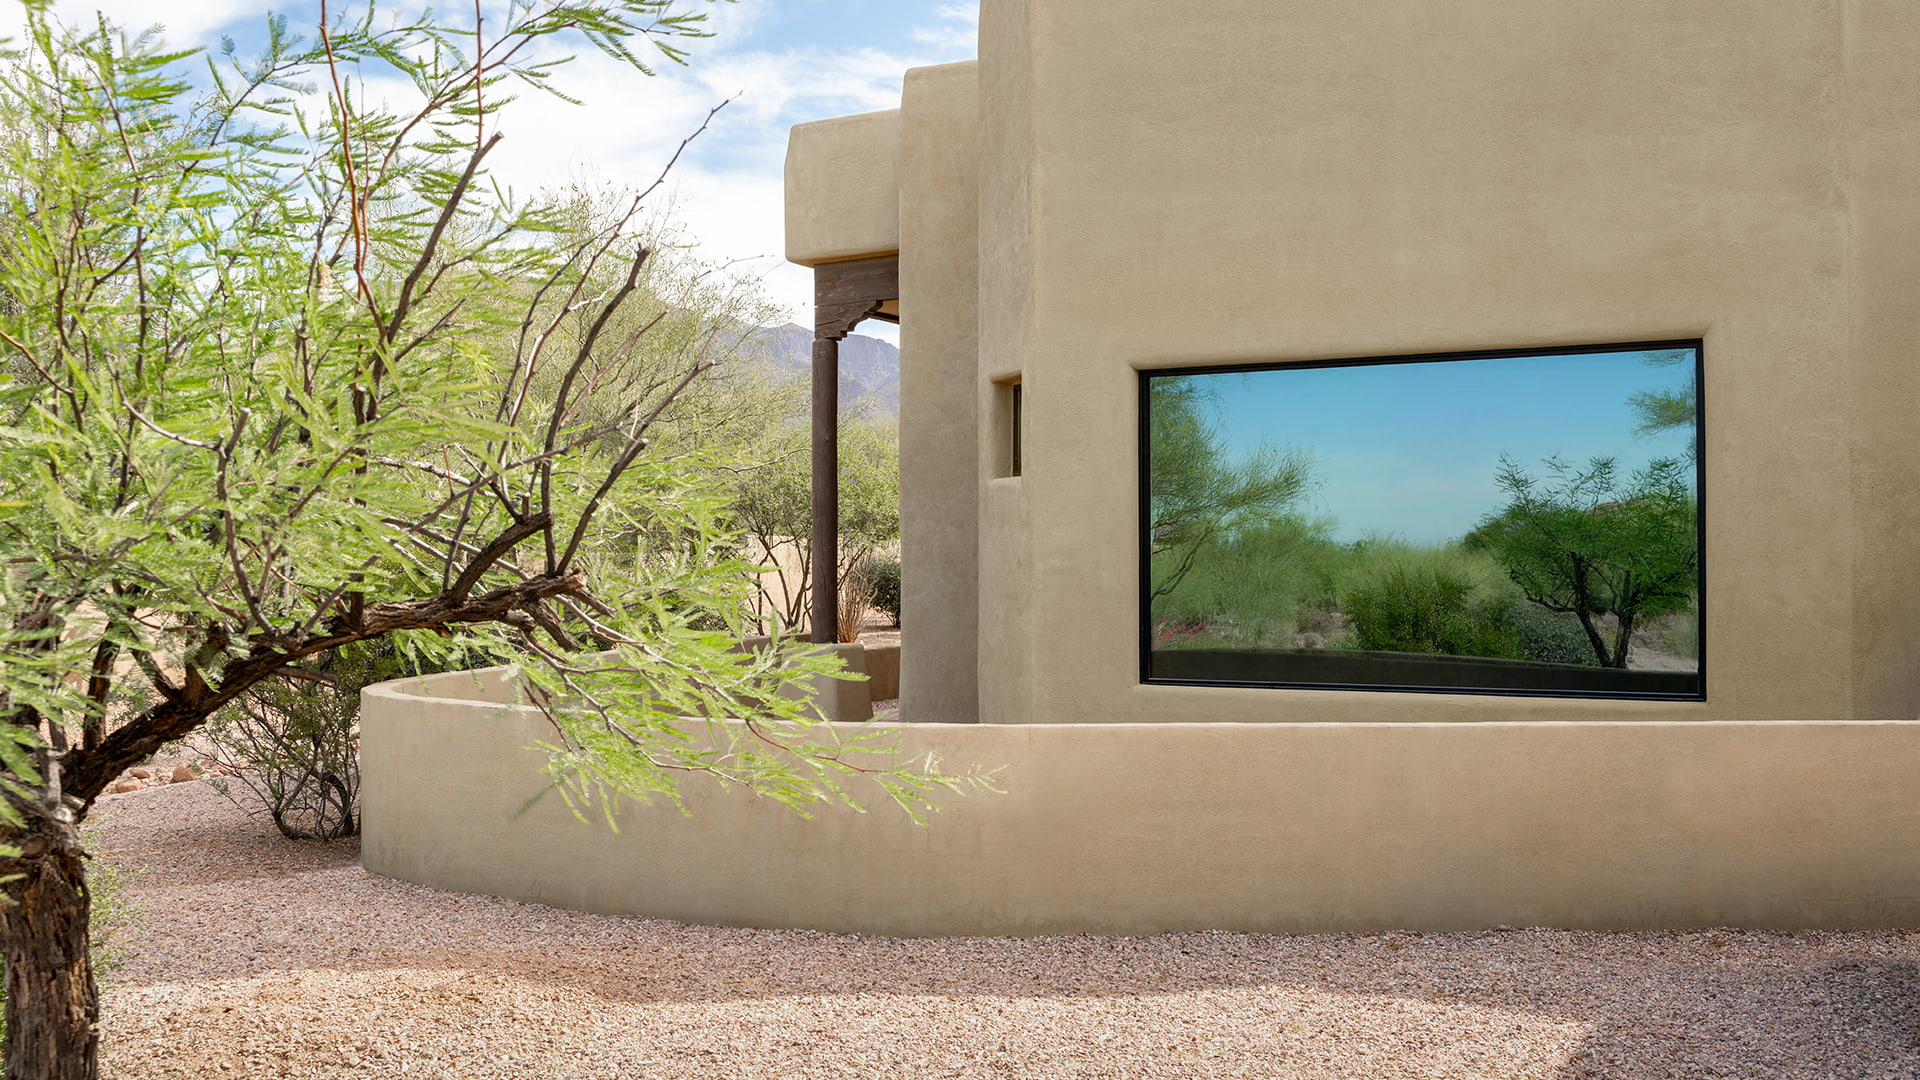 A pueblo-style home exterior with a single large picture window